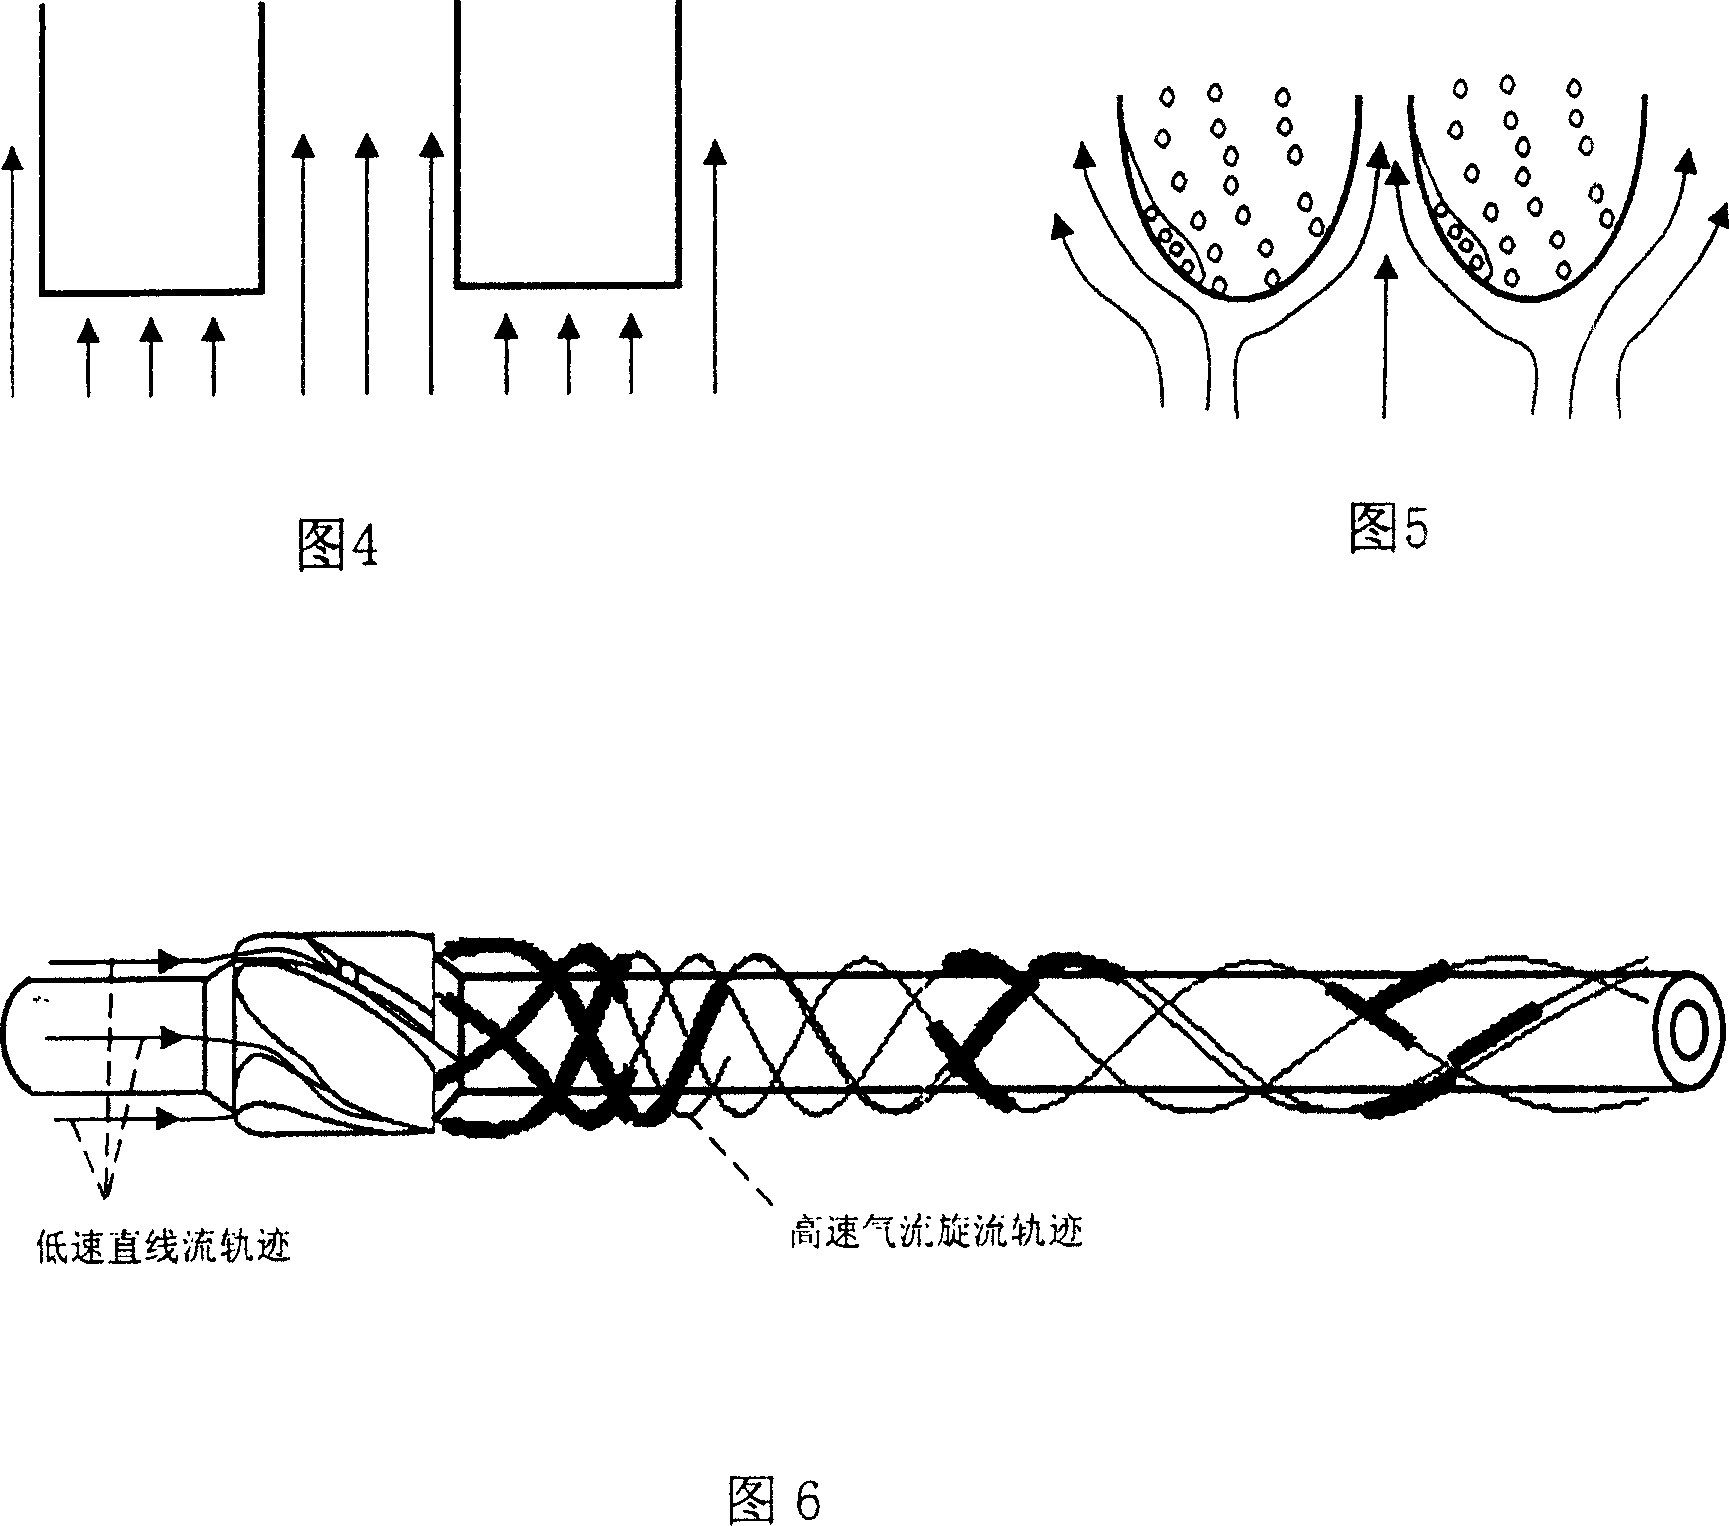 Stabilizer of gas drill horizontal well